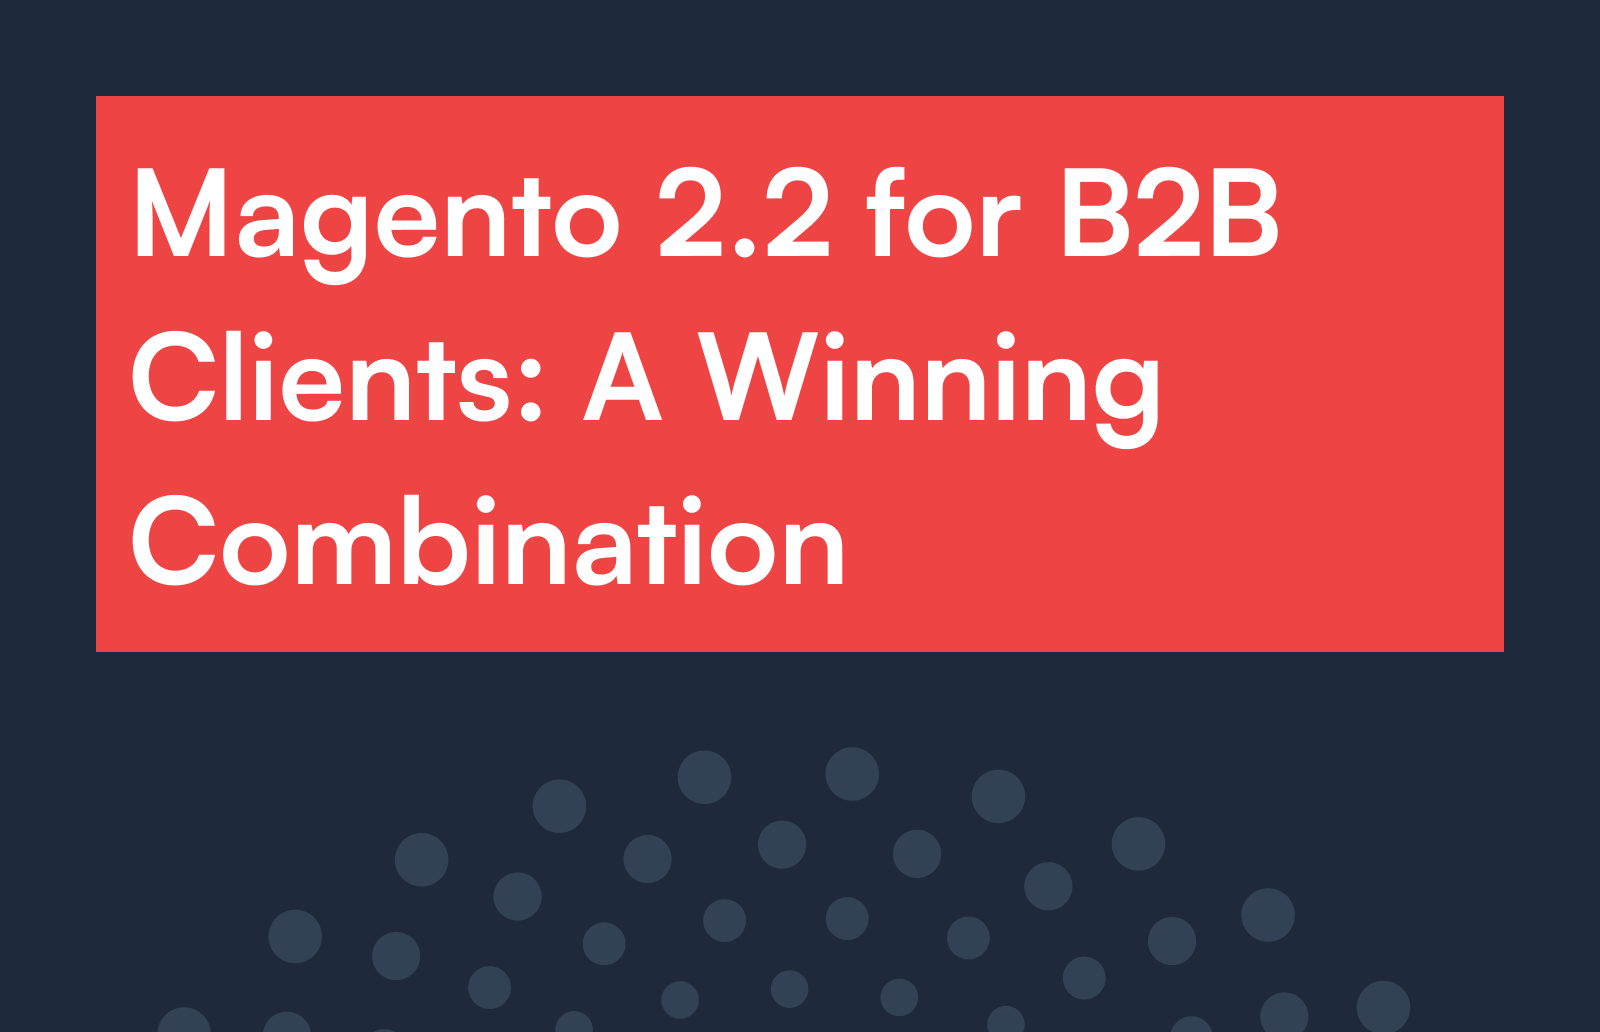 Magento 2.2 for B2B Clients: A Winning Combination